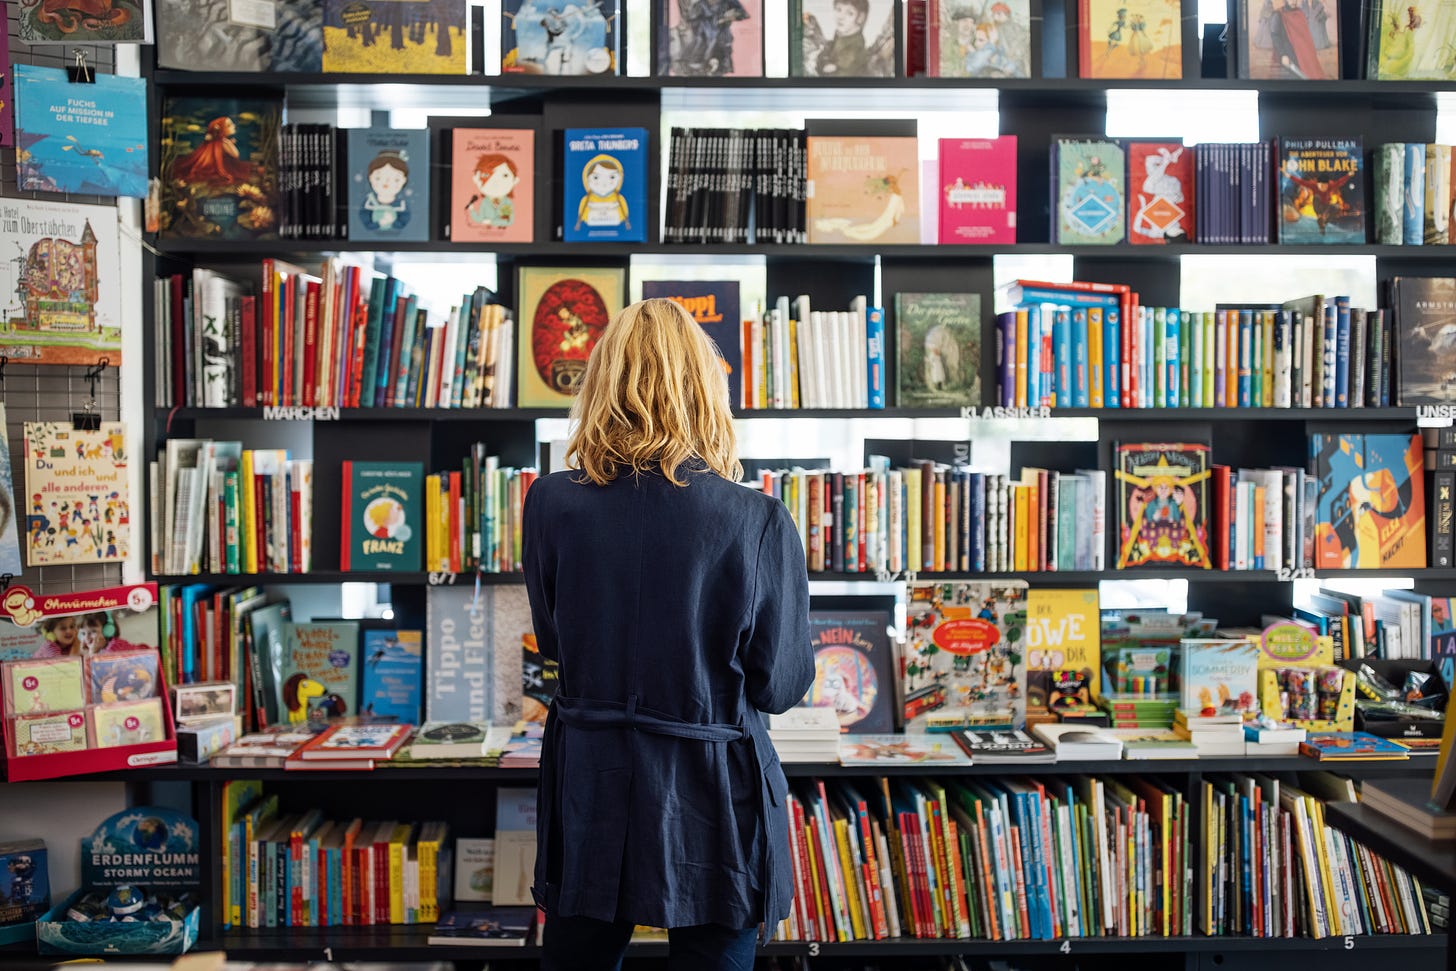 A woman browses the selection of books at a bookstore.